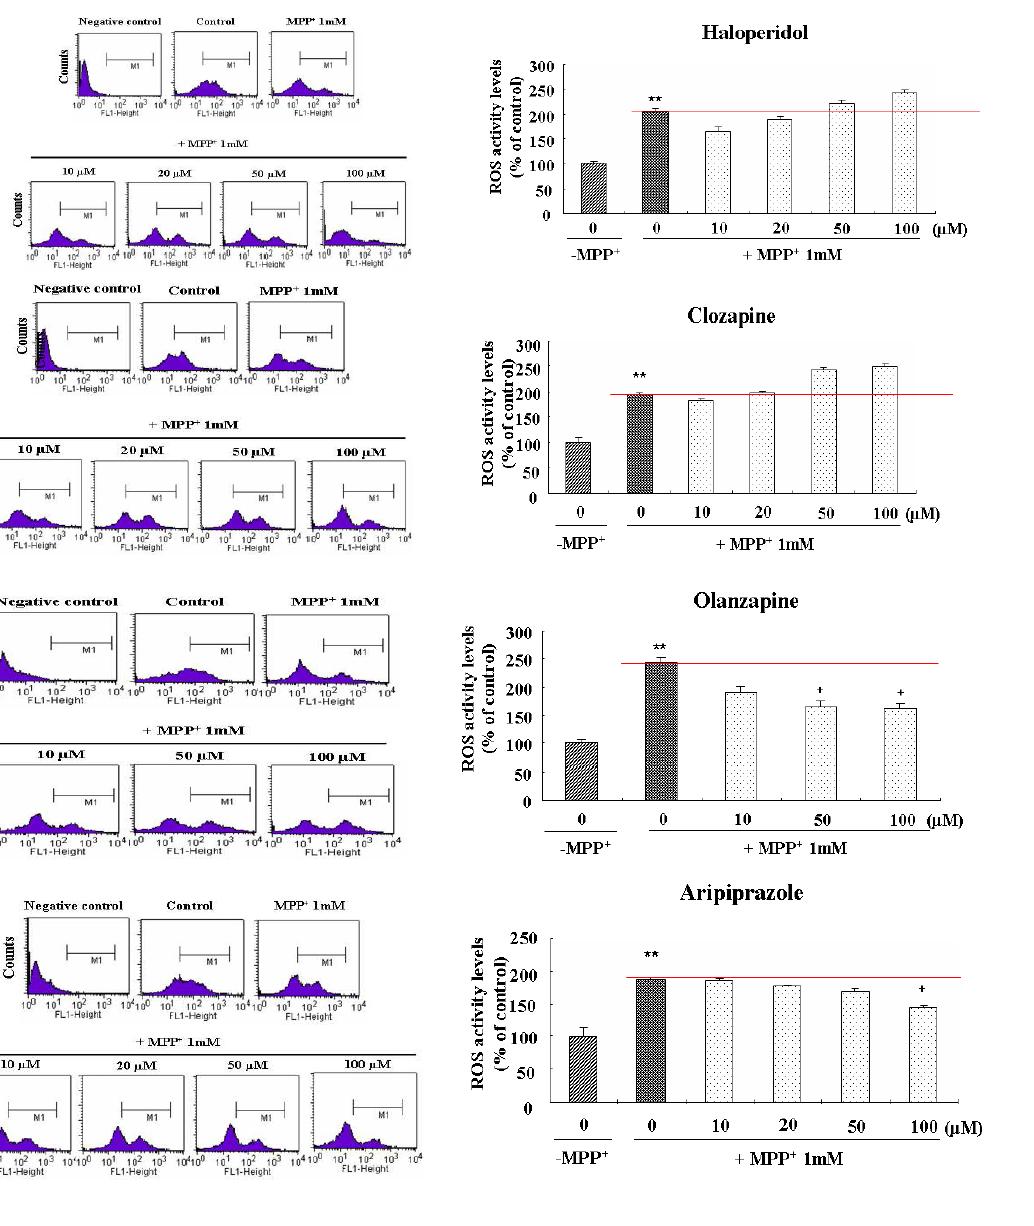 The effect of antipsychotics on MPP-induced ROS activity of in PC12 cells.